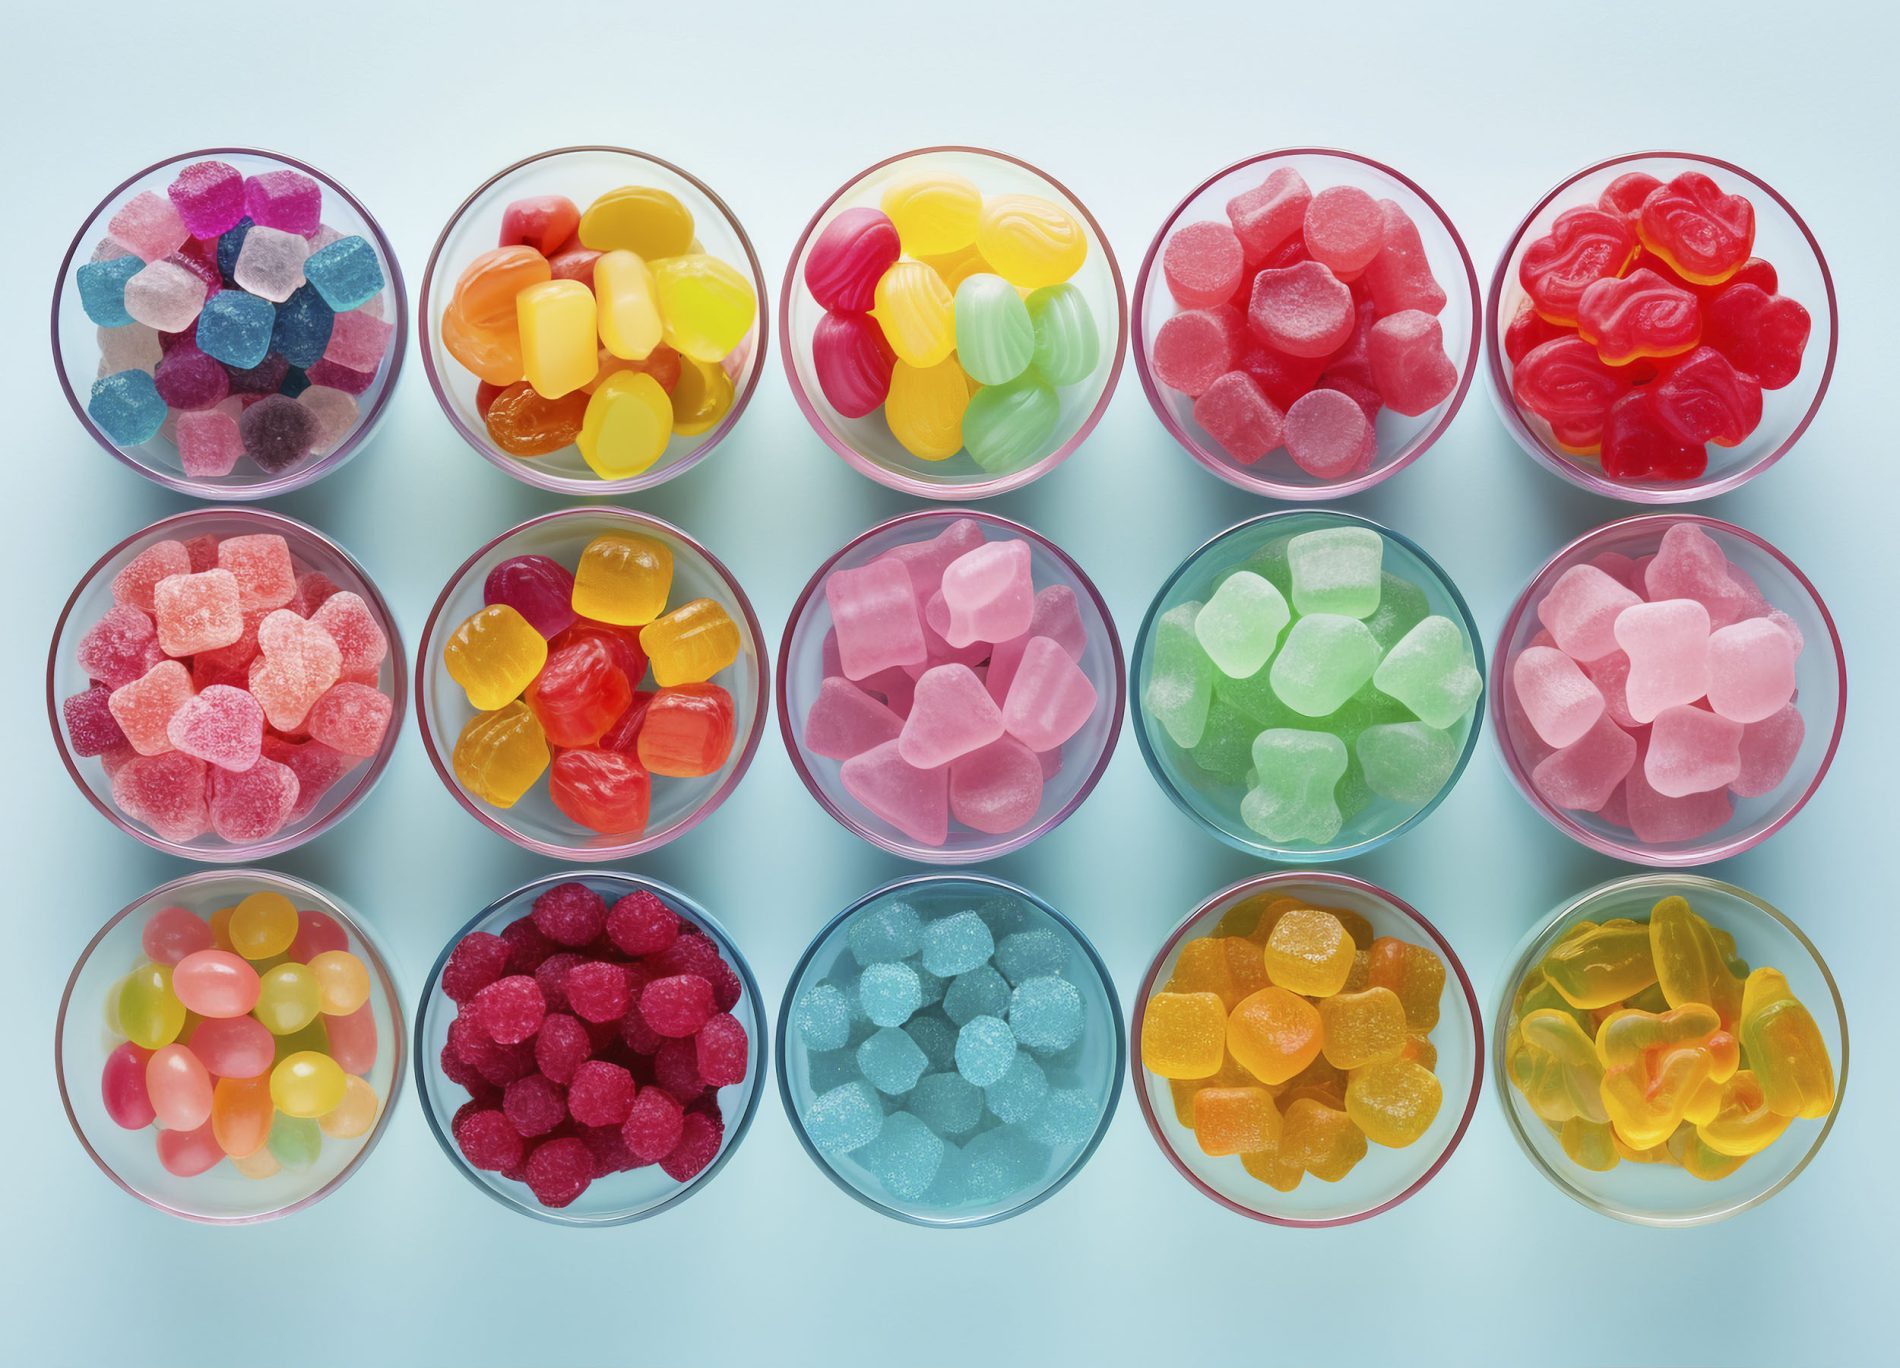 A new category has come along to revolutionize the industry: functional gummies, which provide a solution to an increasing consumer demand for food supplements. It is a new way to incorporate vitamins, omega-3 fatty acids, probiotics and many other active ingredients into the diet. In the last 4 years this category grew at a CAGR of 46.5% and the market is expected to reach $48.5 billion by 2028. It is not surprising then that many food companies are willing to capture this growth. However, it is a big challenge for manufacturers to balance health, nutrition, convenience, taste and texture while at the same time optimizing costs.